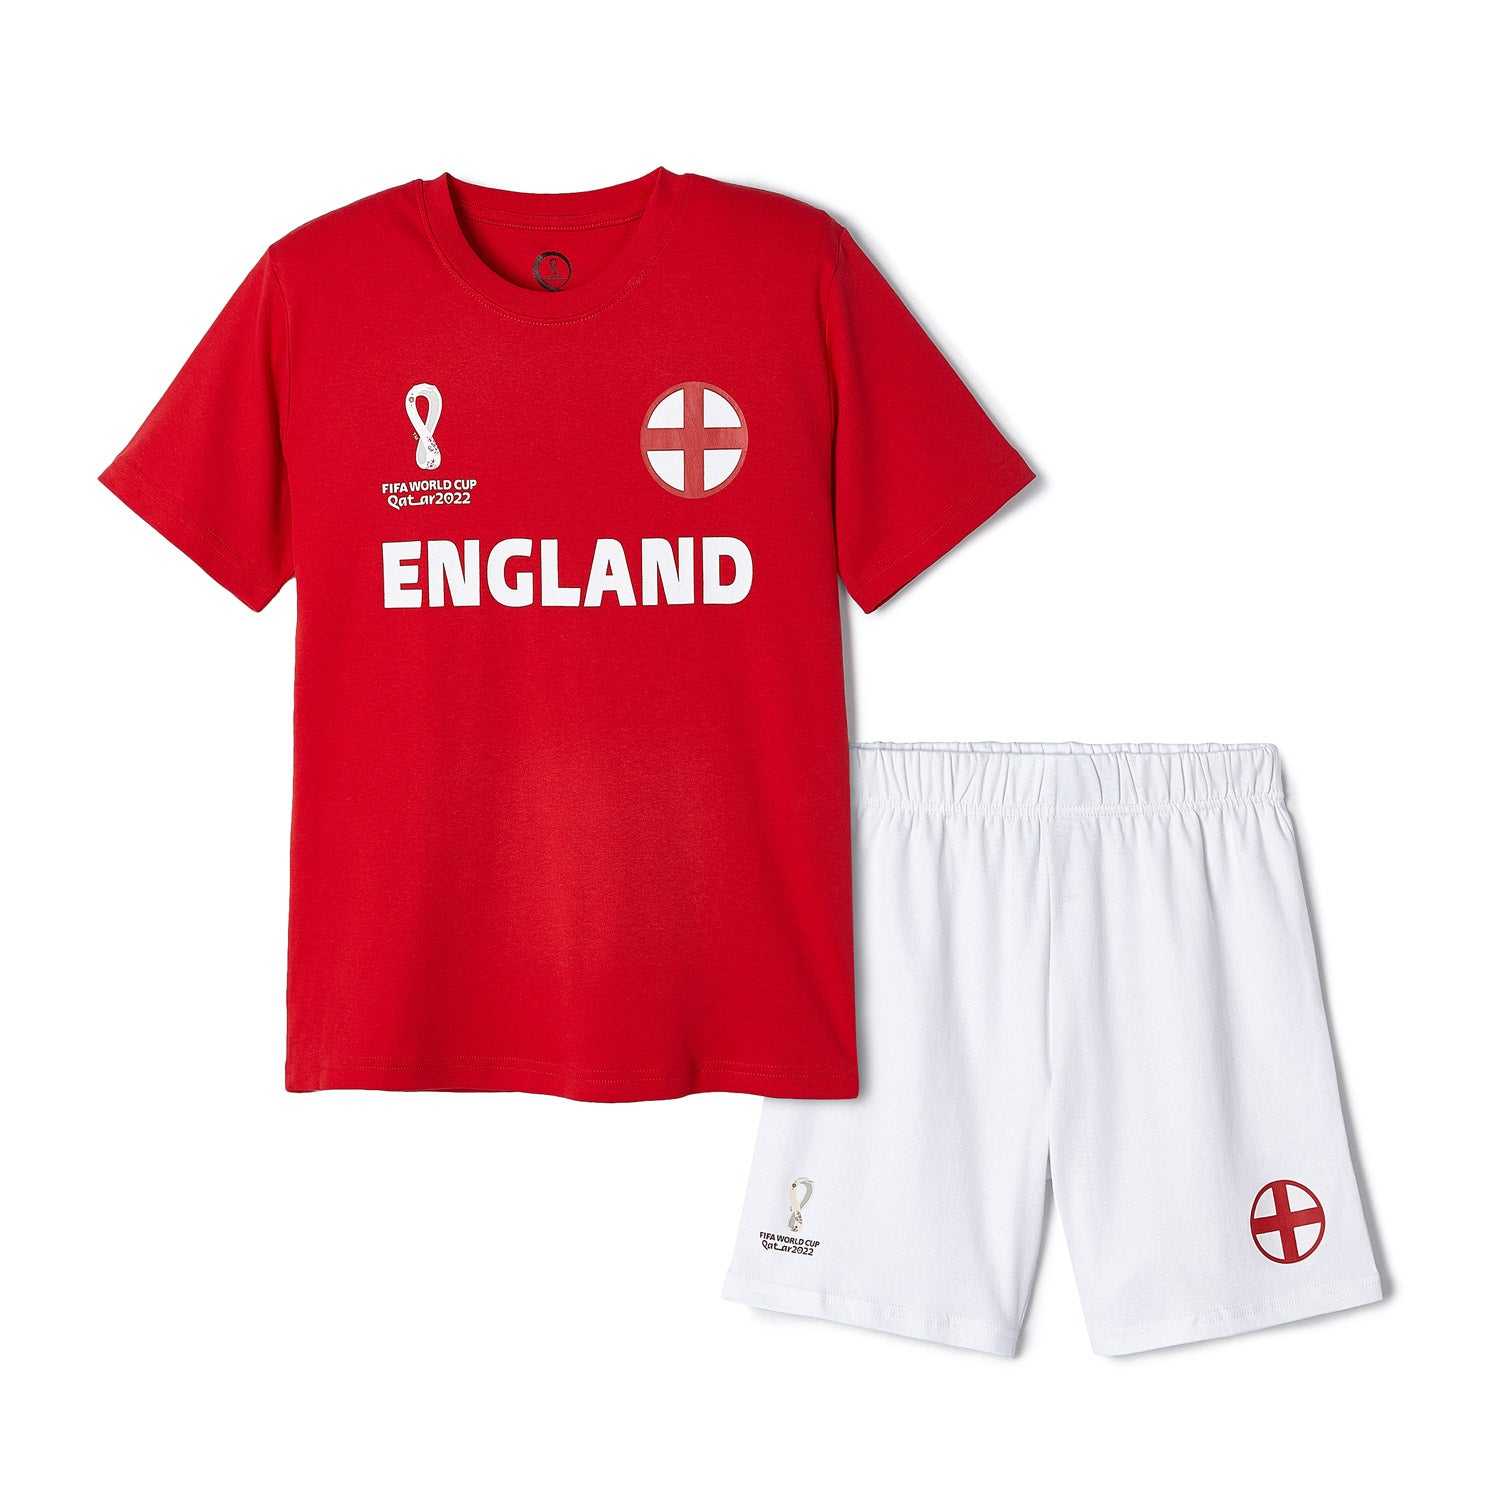 2022 World Cup England Red T-Shirt - Youth